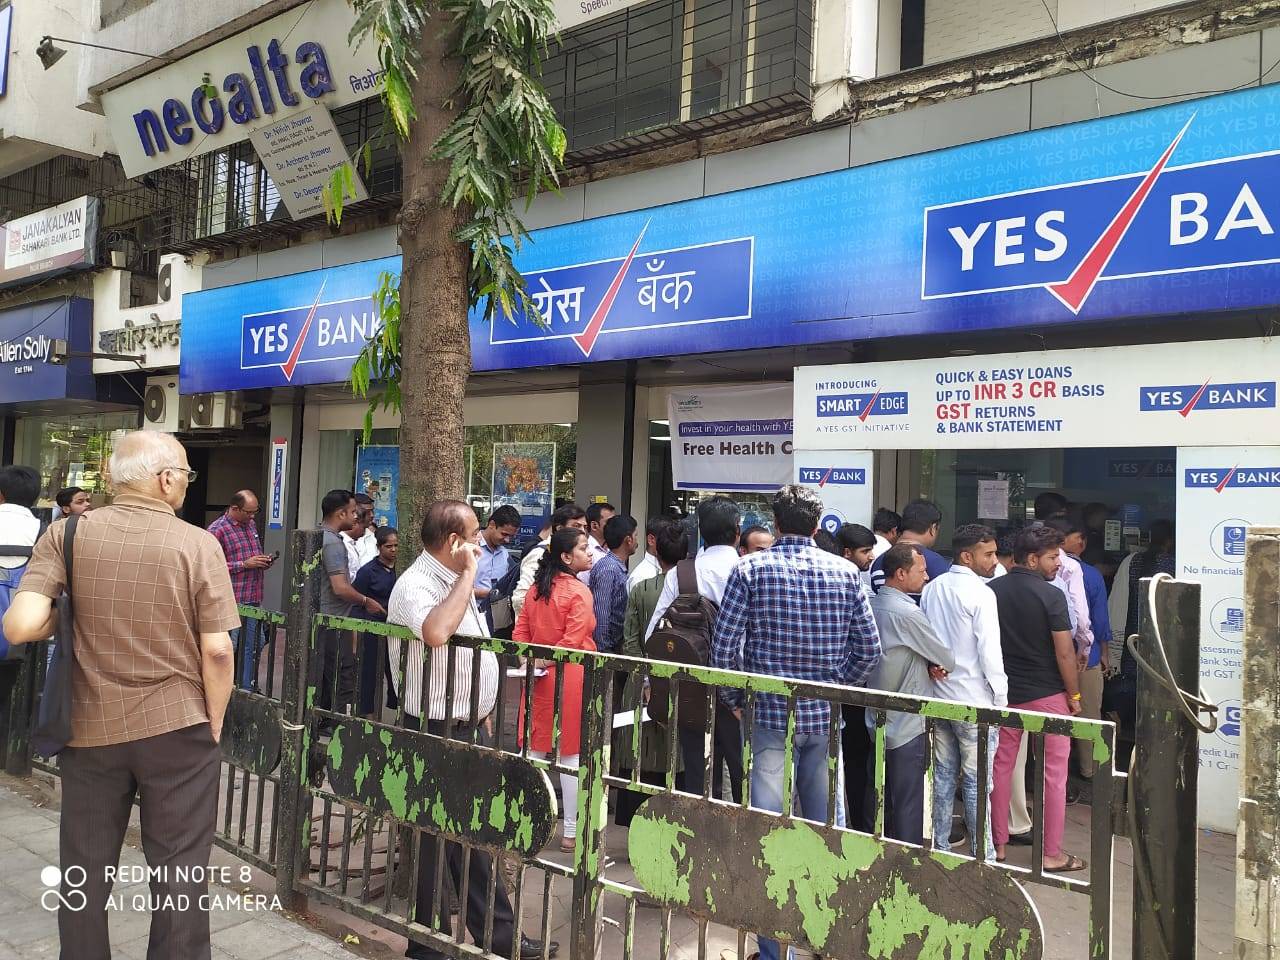 In pics: Customers of Yes Bank line up outside ATMs for cash fearing loss  of deposits